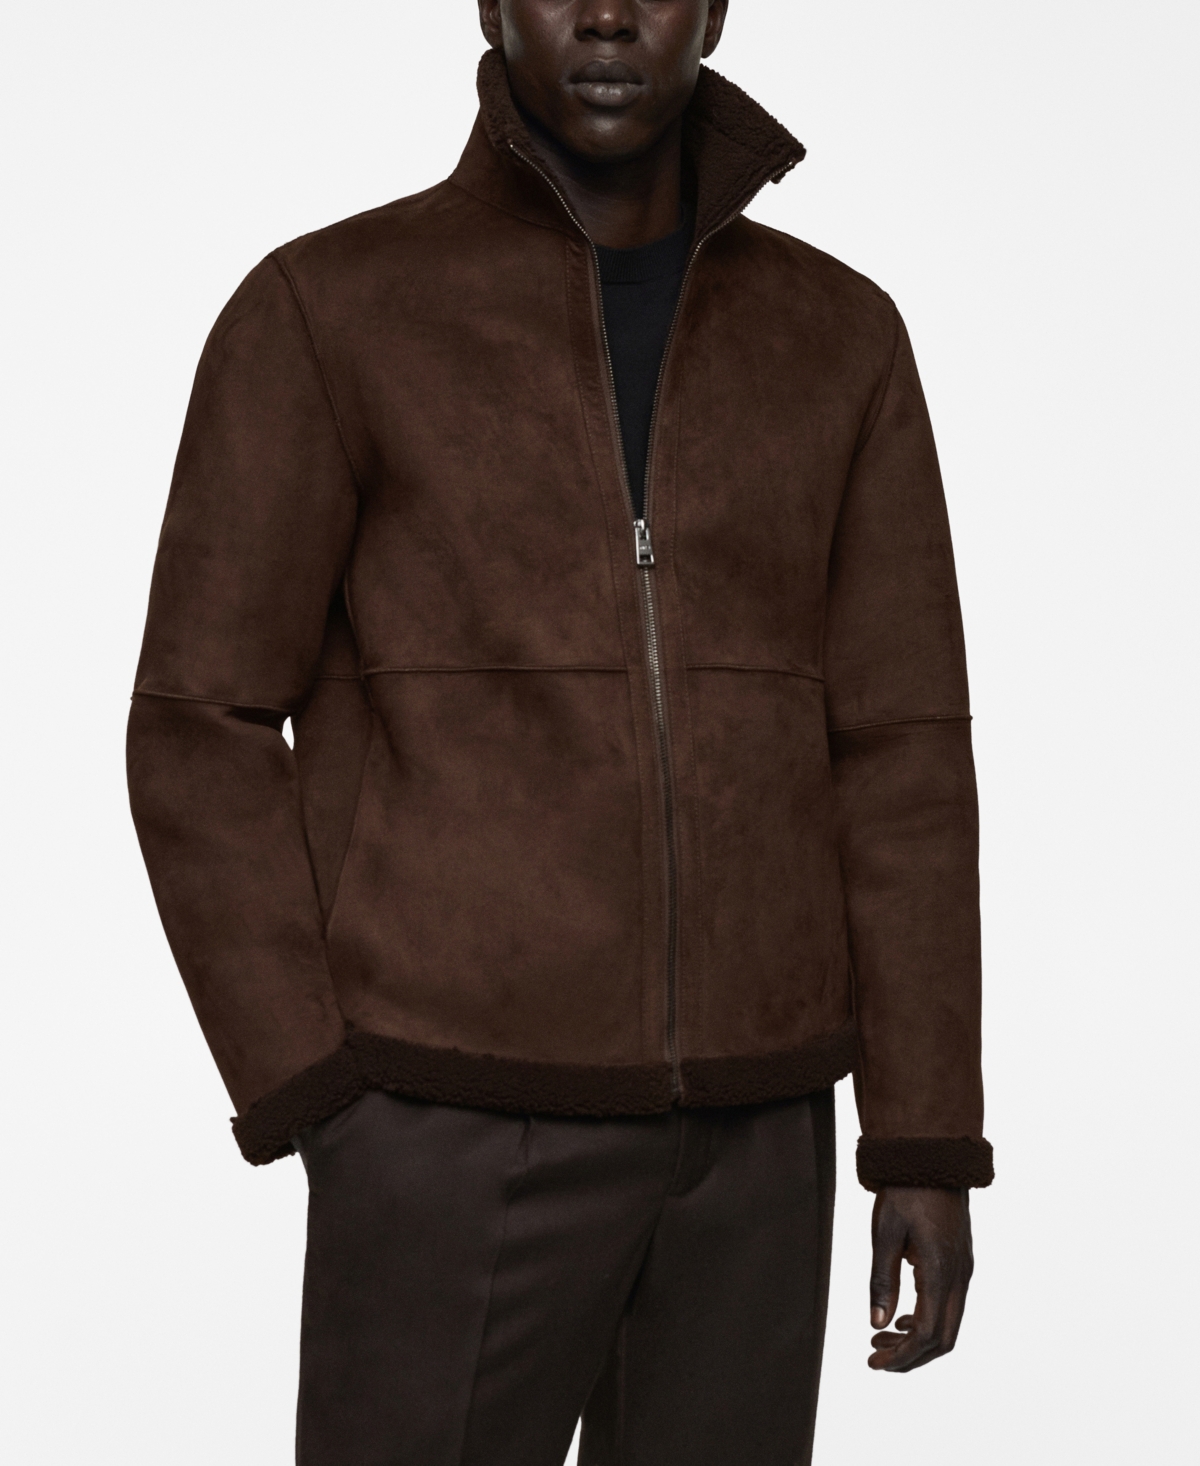 Men's Shearling-Lined Leather-Effect Jacket - Chocolate